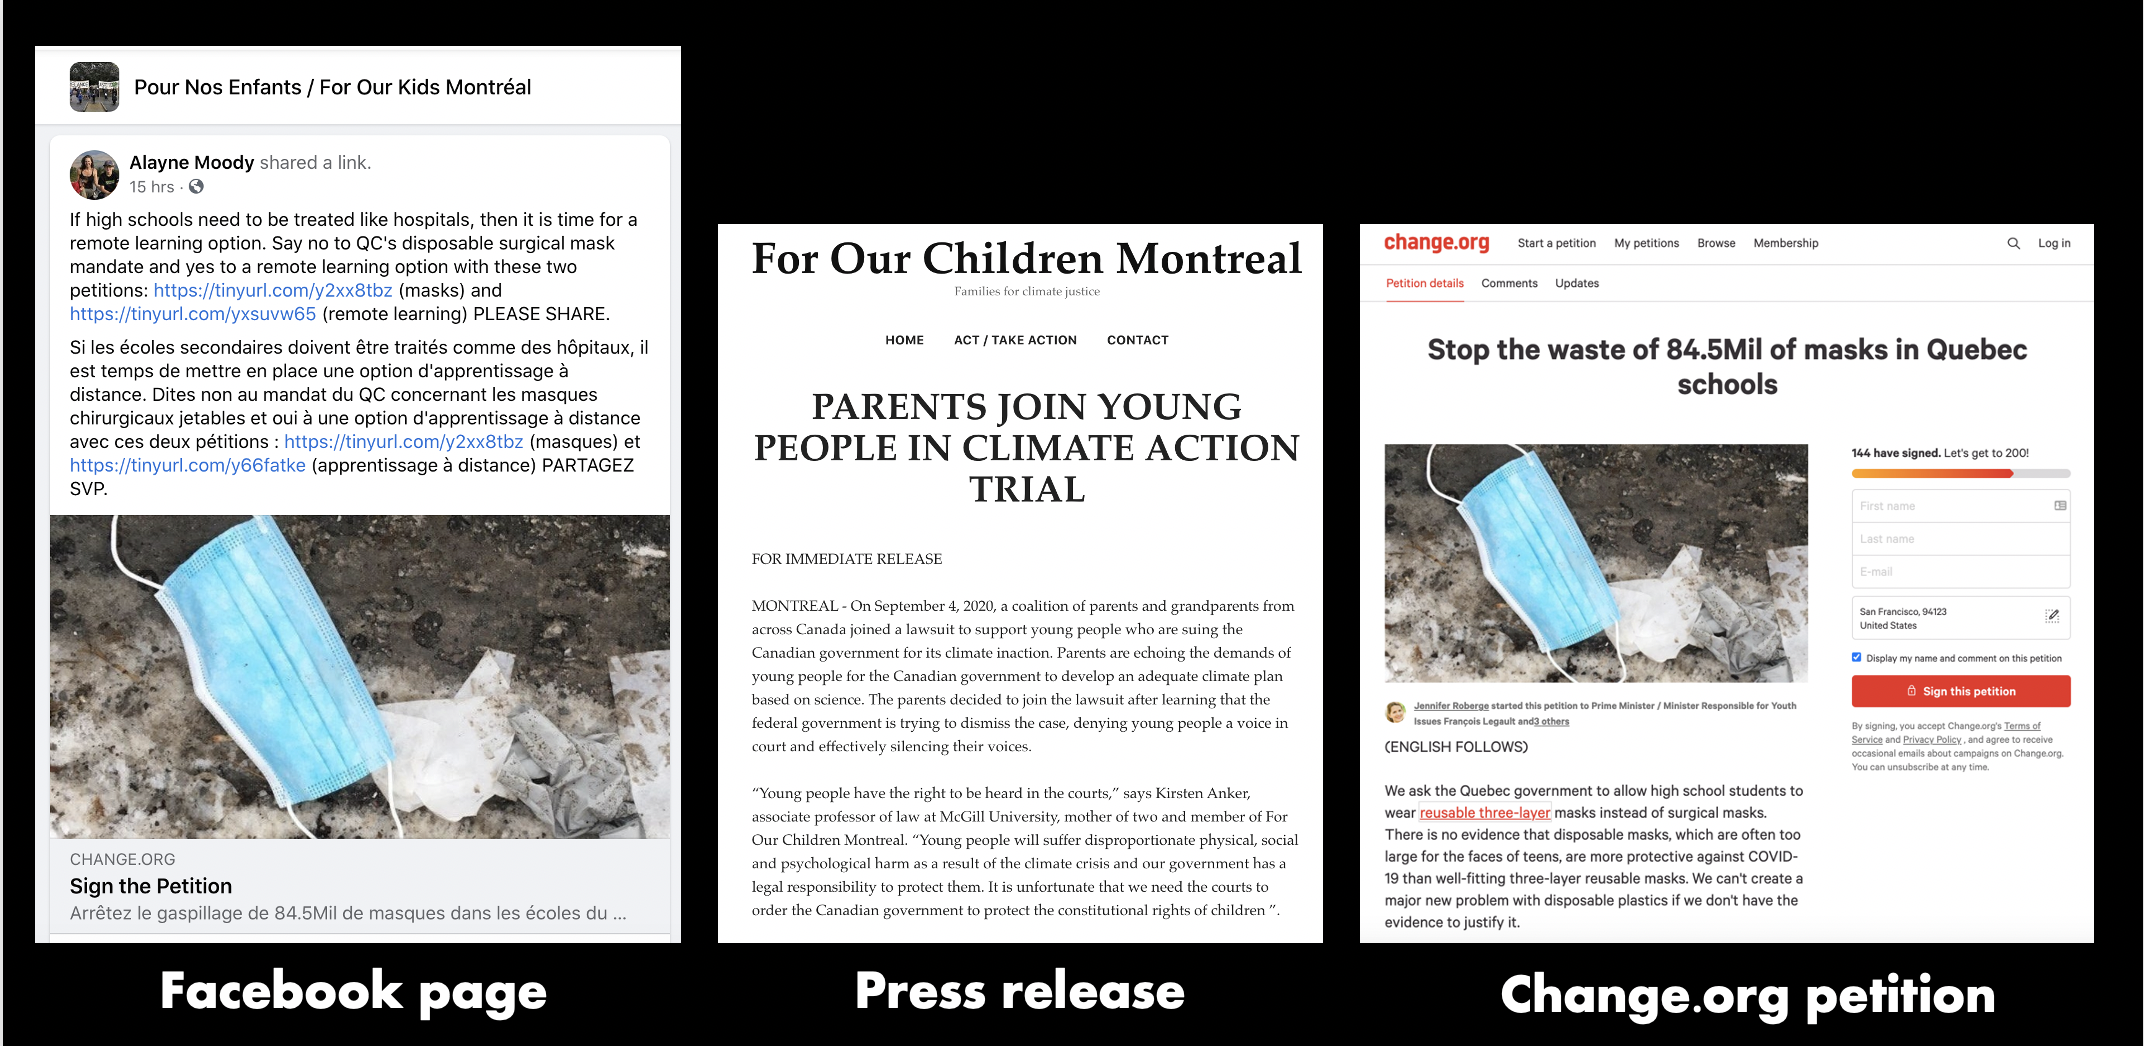 For Our Children created a Facebook Page, press release and Change.org petition drive to collect signatures.